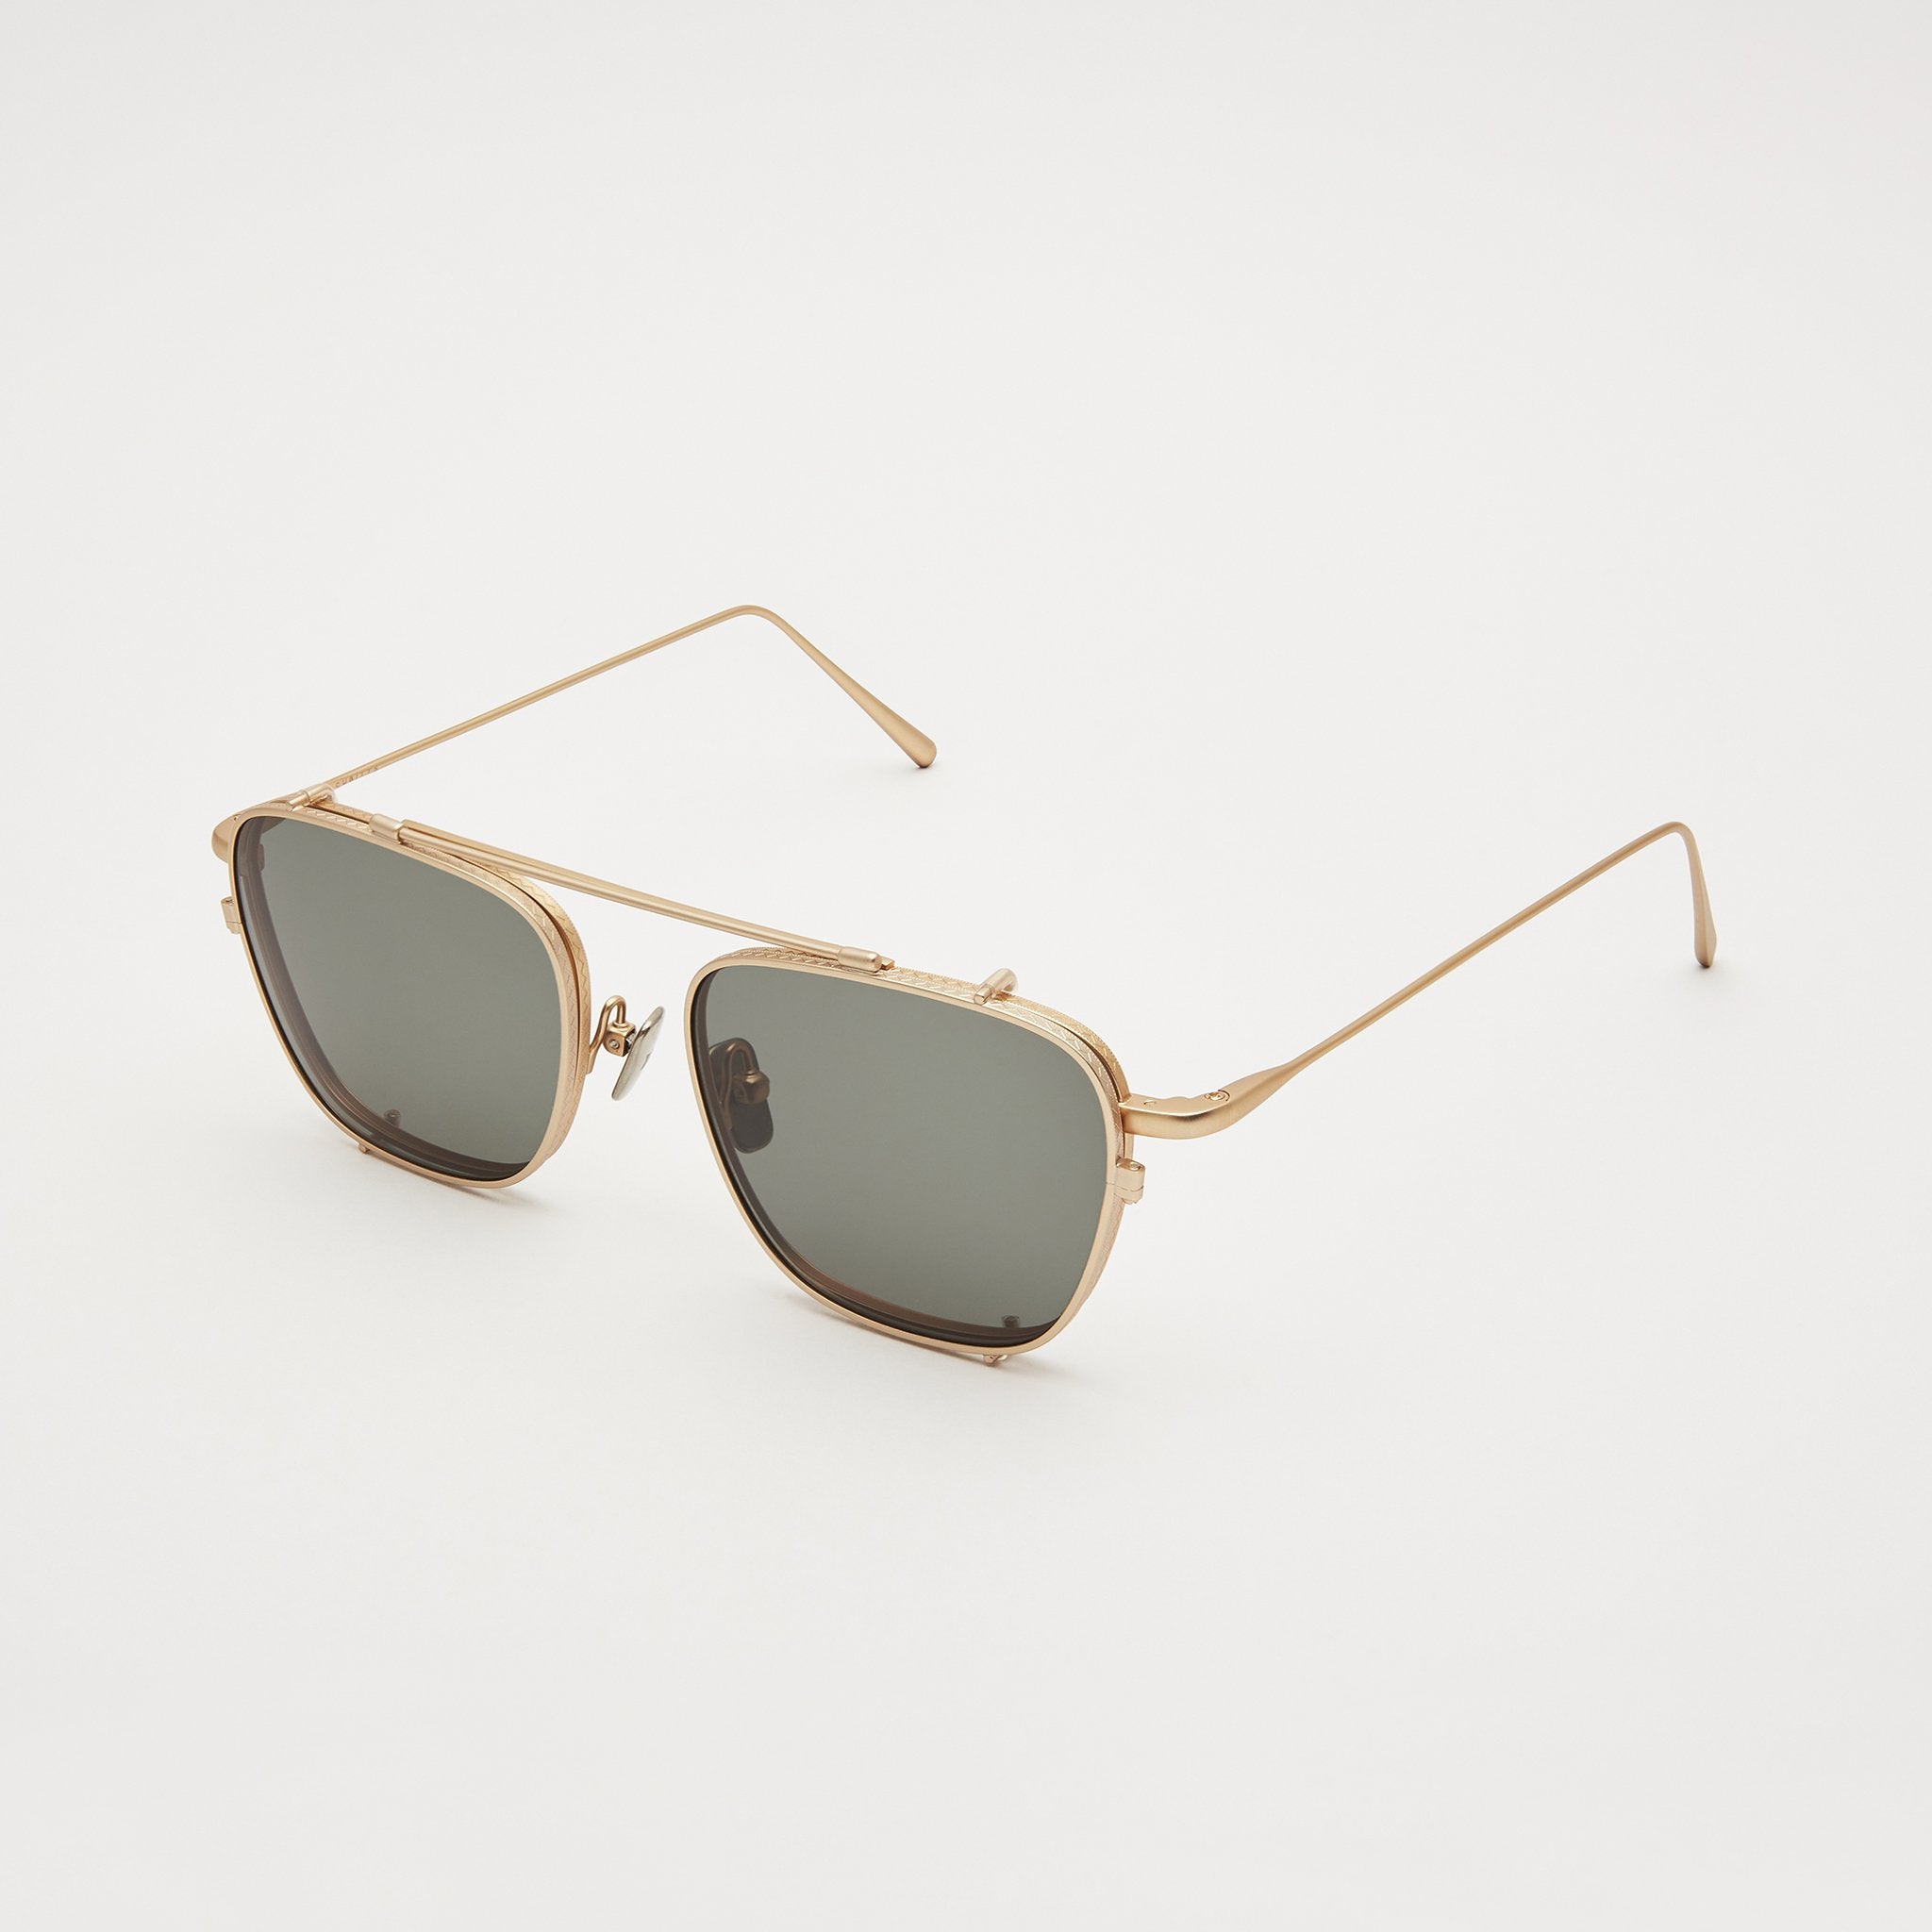 Collier Clip-on sunglasses | Cubitts